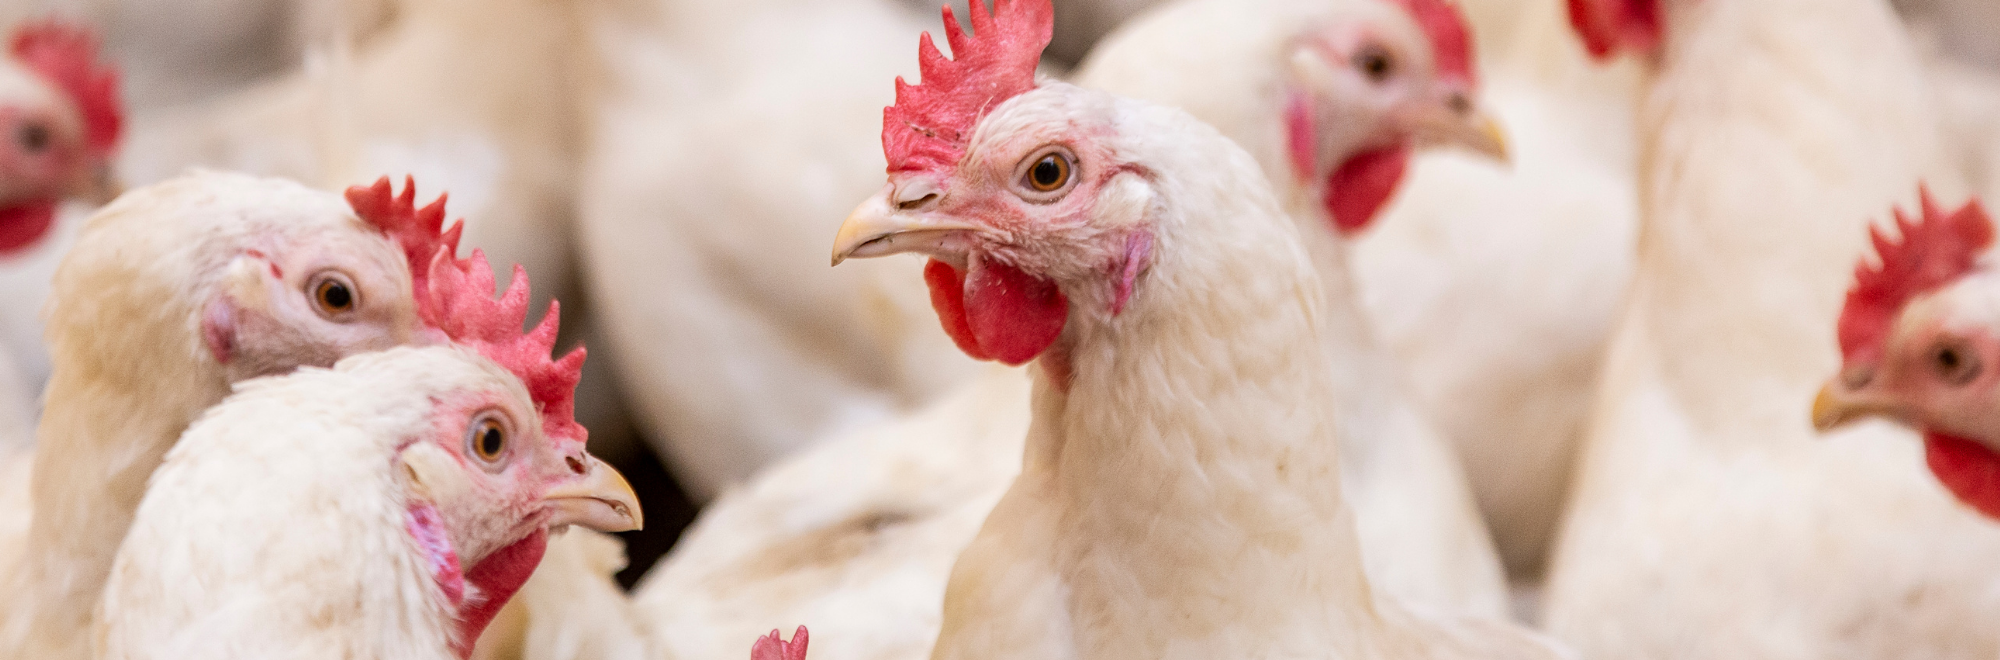 banner photo of poultry